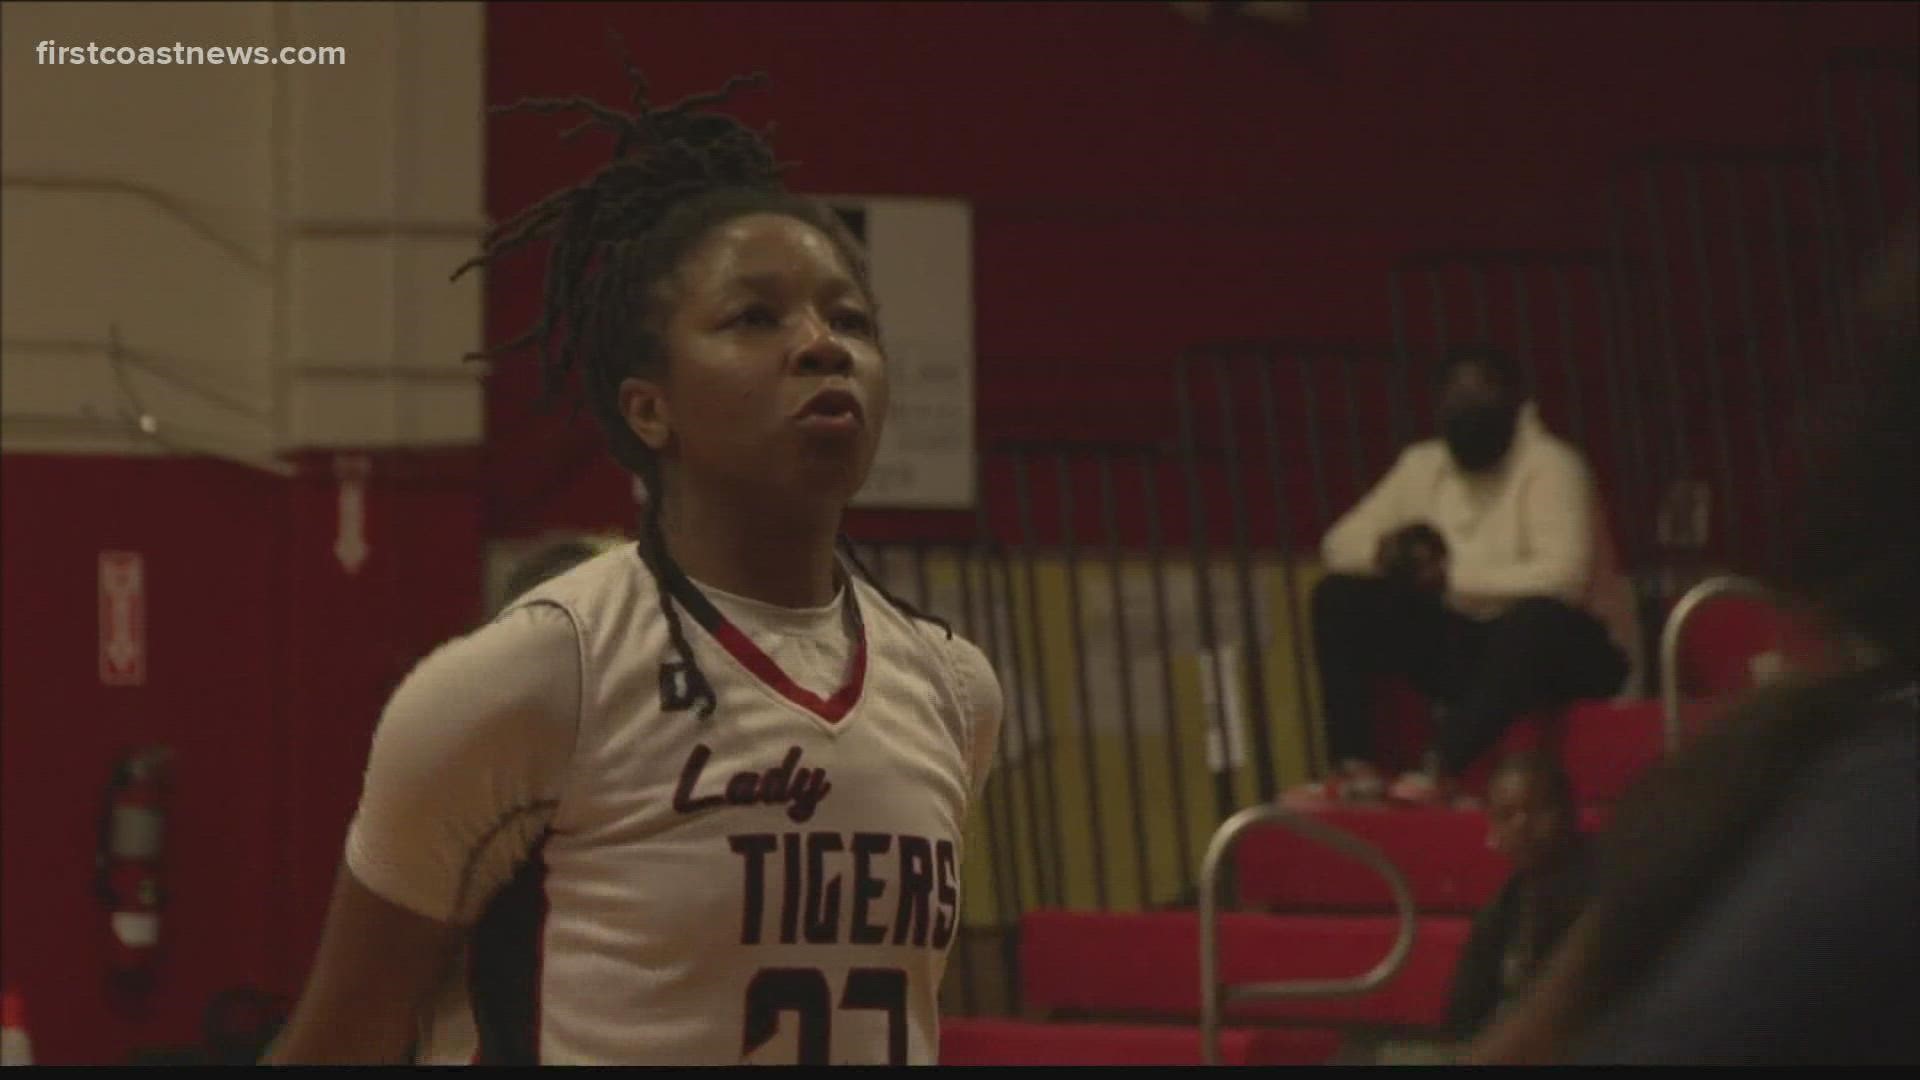 According to her coaches, Jazmine is one of the reasons the Lady Tigers are back on the map and leads the team in scores.